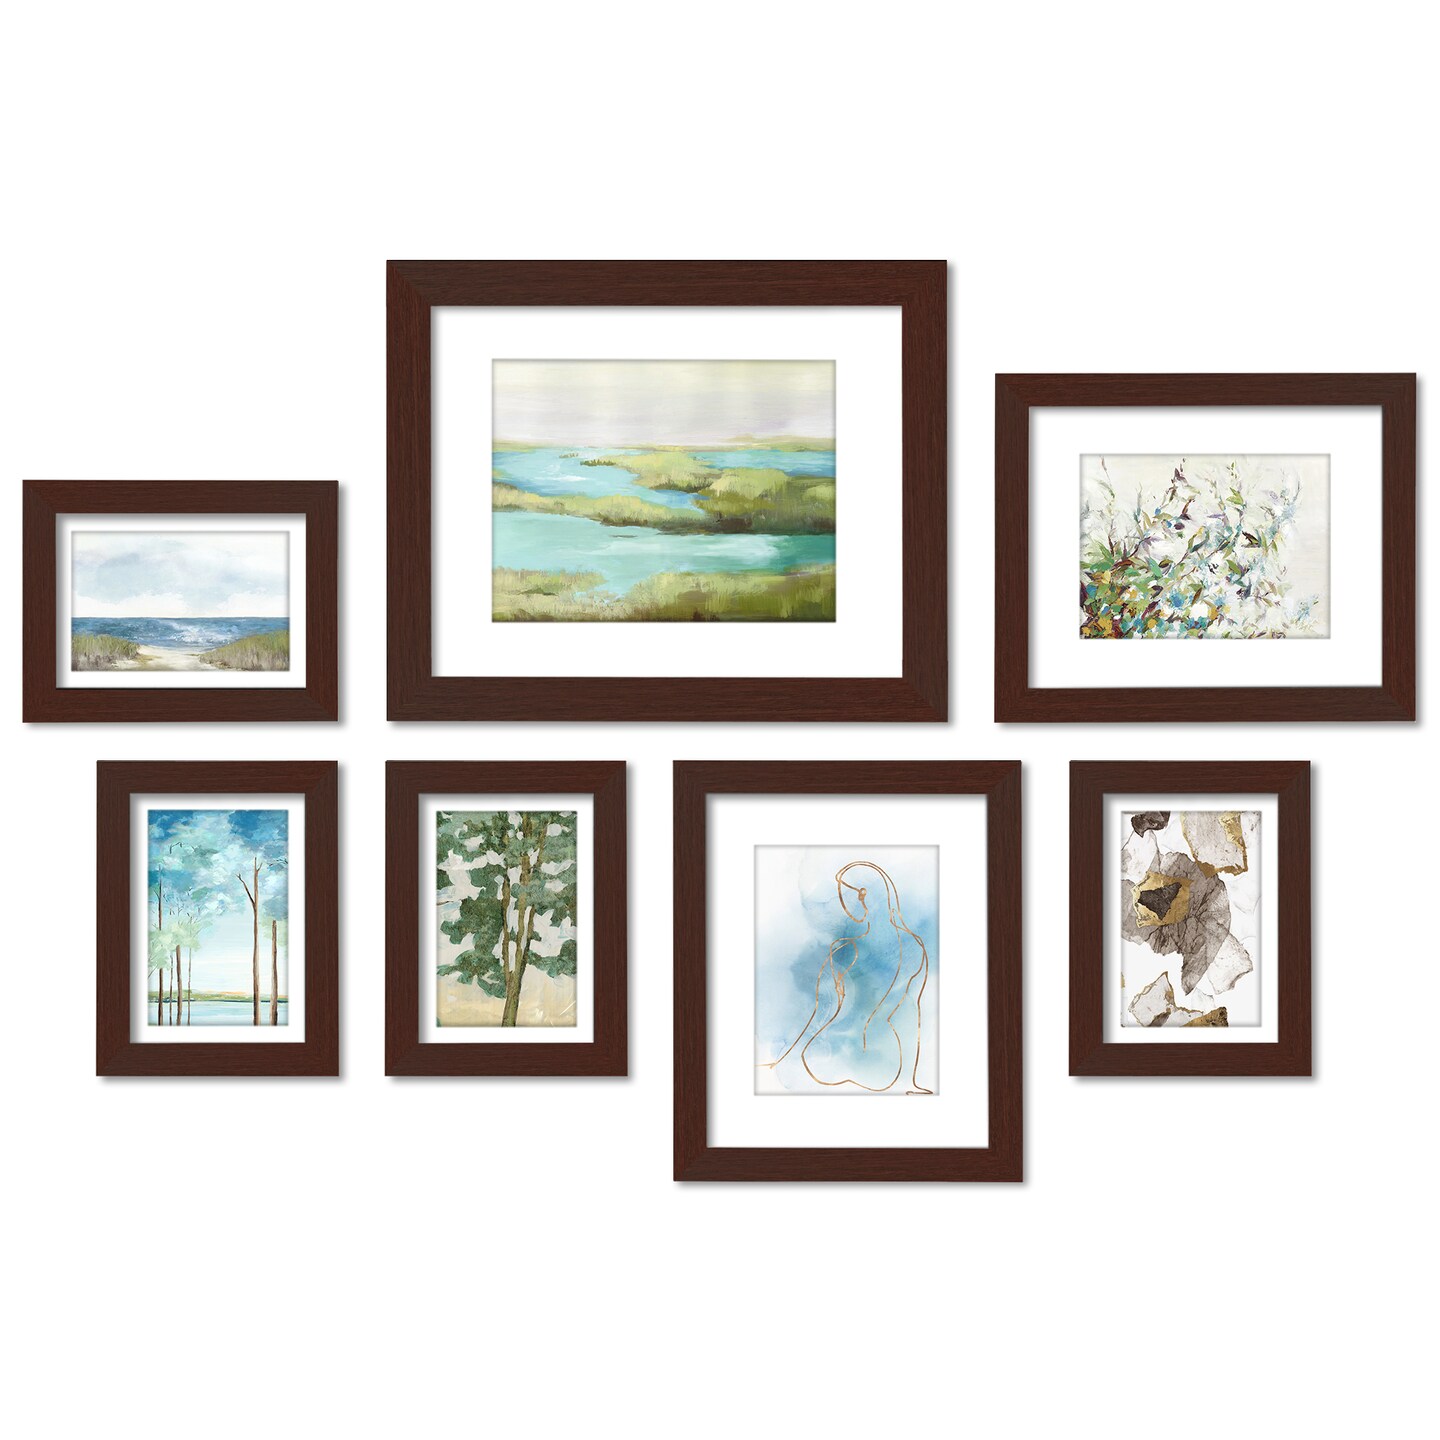 Landscape Panorama by PI Creative - 7 Piece Framed Gallery Wall Art Set